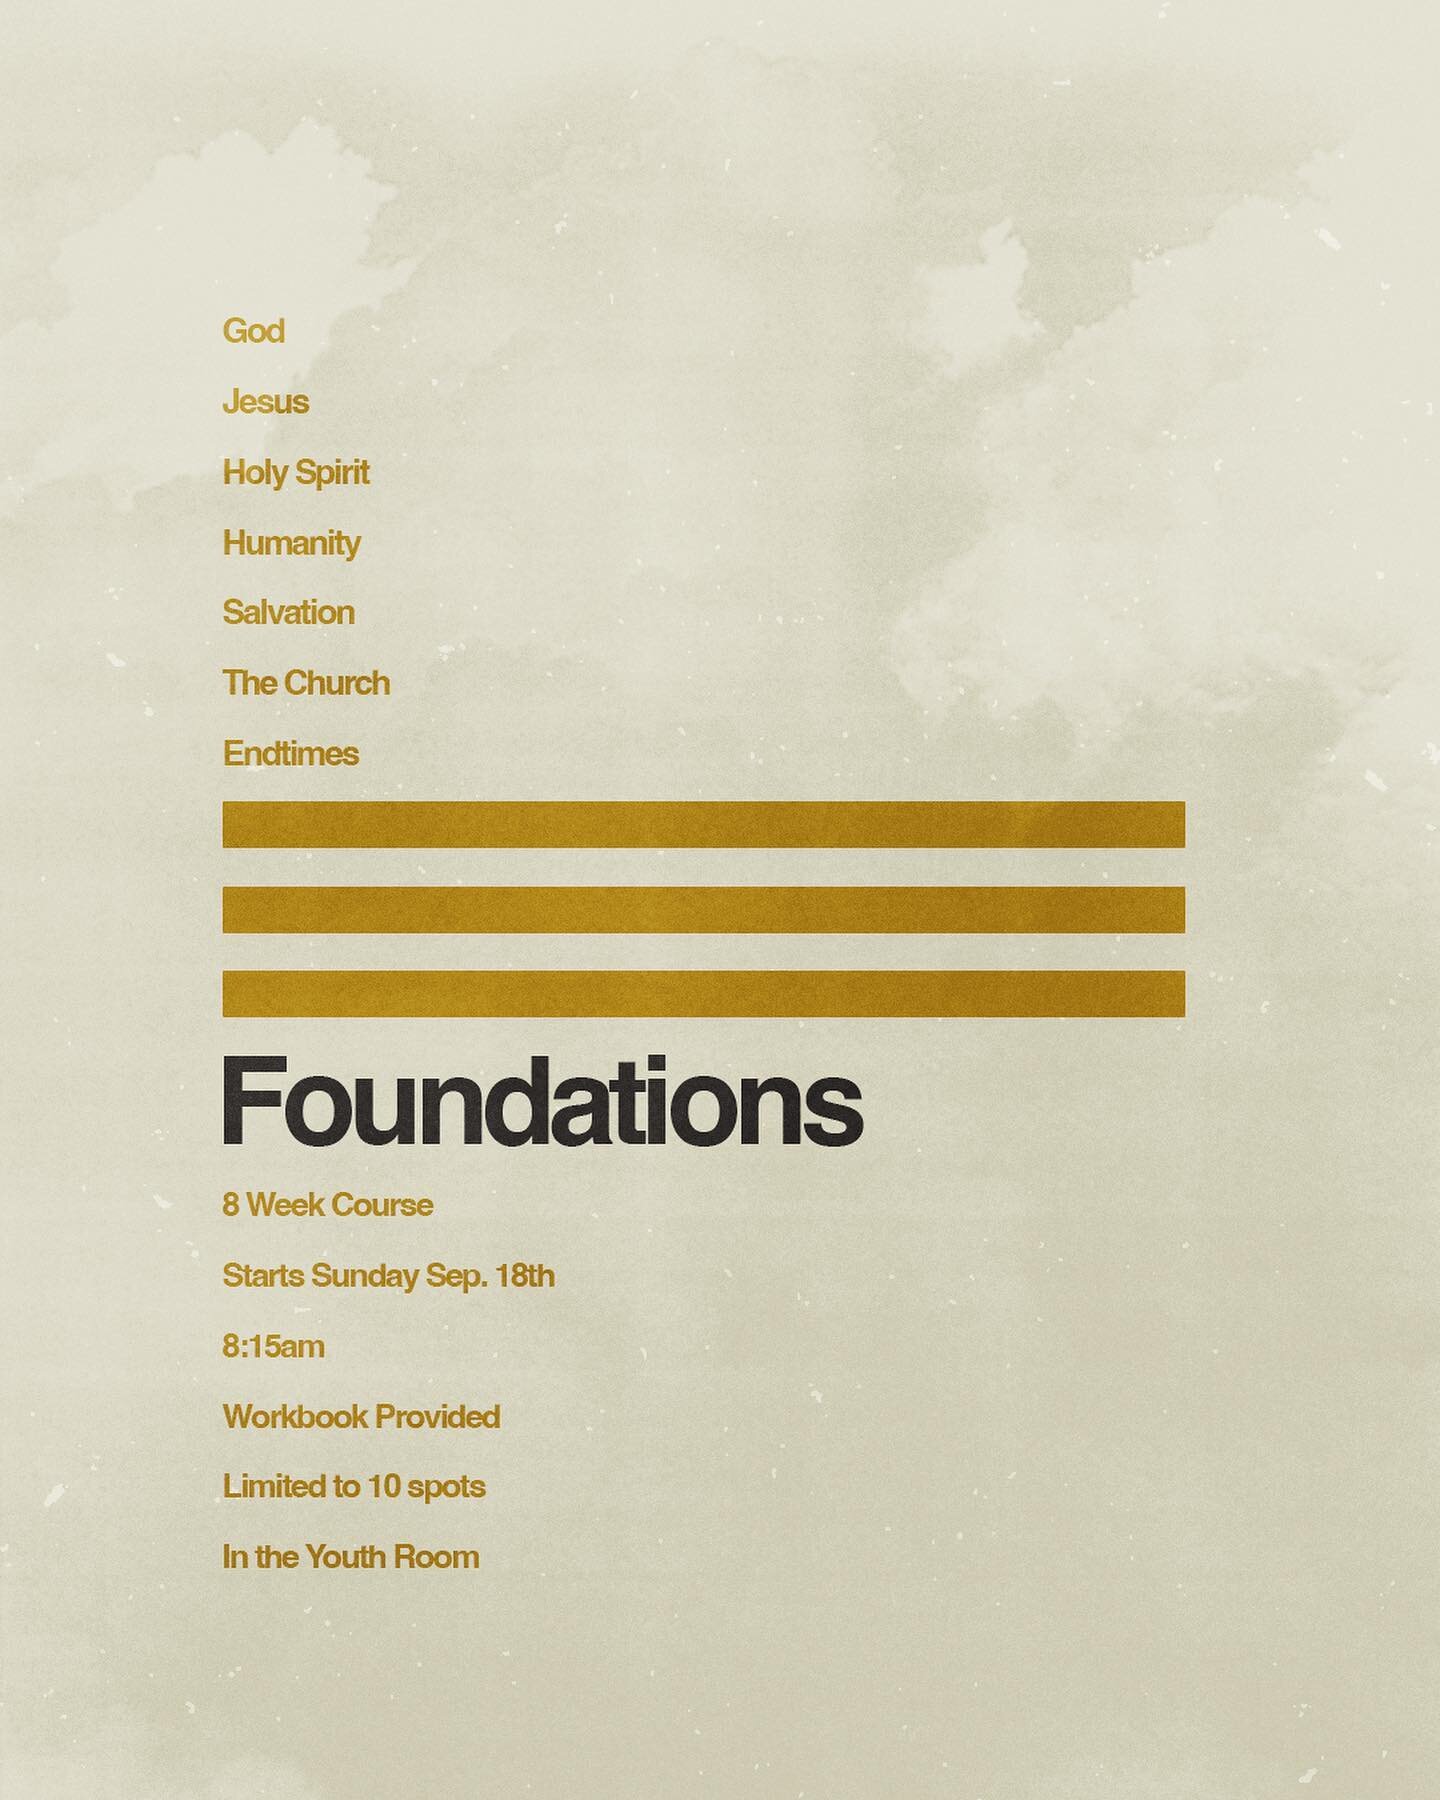 Church &mdash; We&rsquo;re starting a Foundations course for those looking to ground their faith in the basics of theology. If you&rsquo;re new to Christianity or looking to get a refresh, then this is the course for you. 

Casey Fritz will be taking